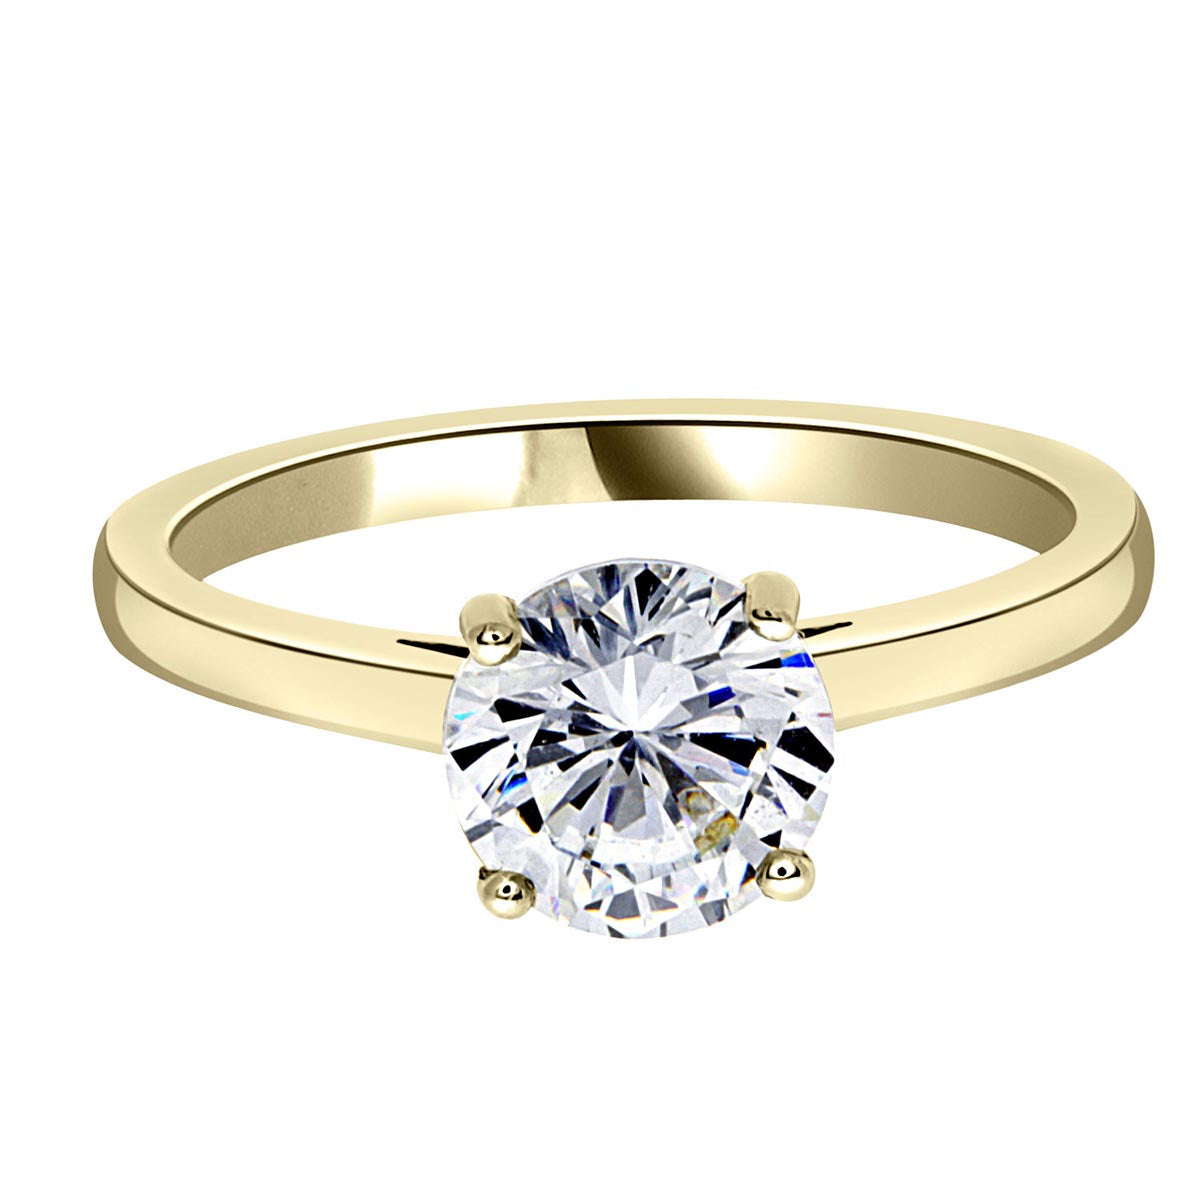 Solitaire Engagement Ring in yellow gold